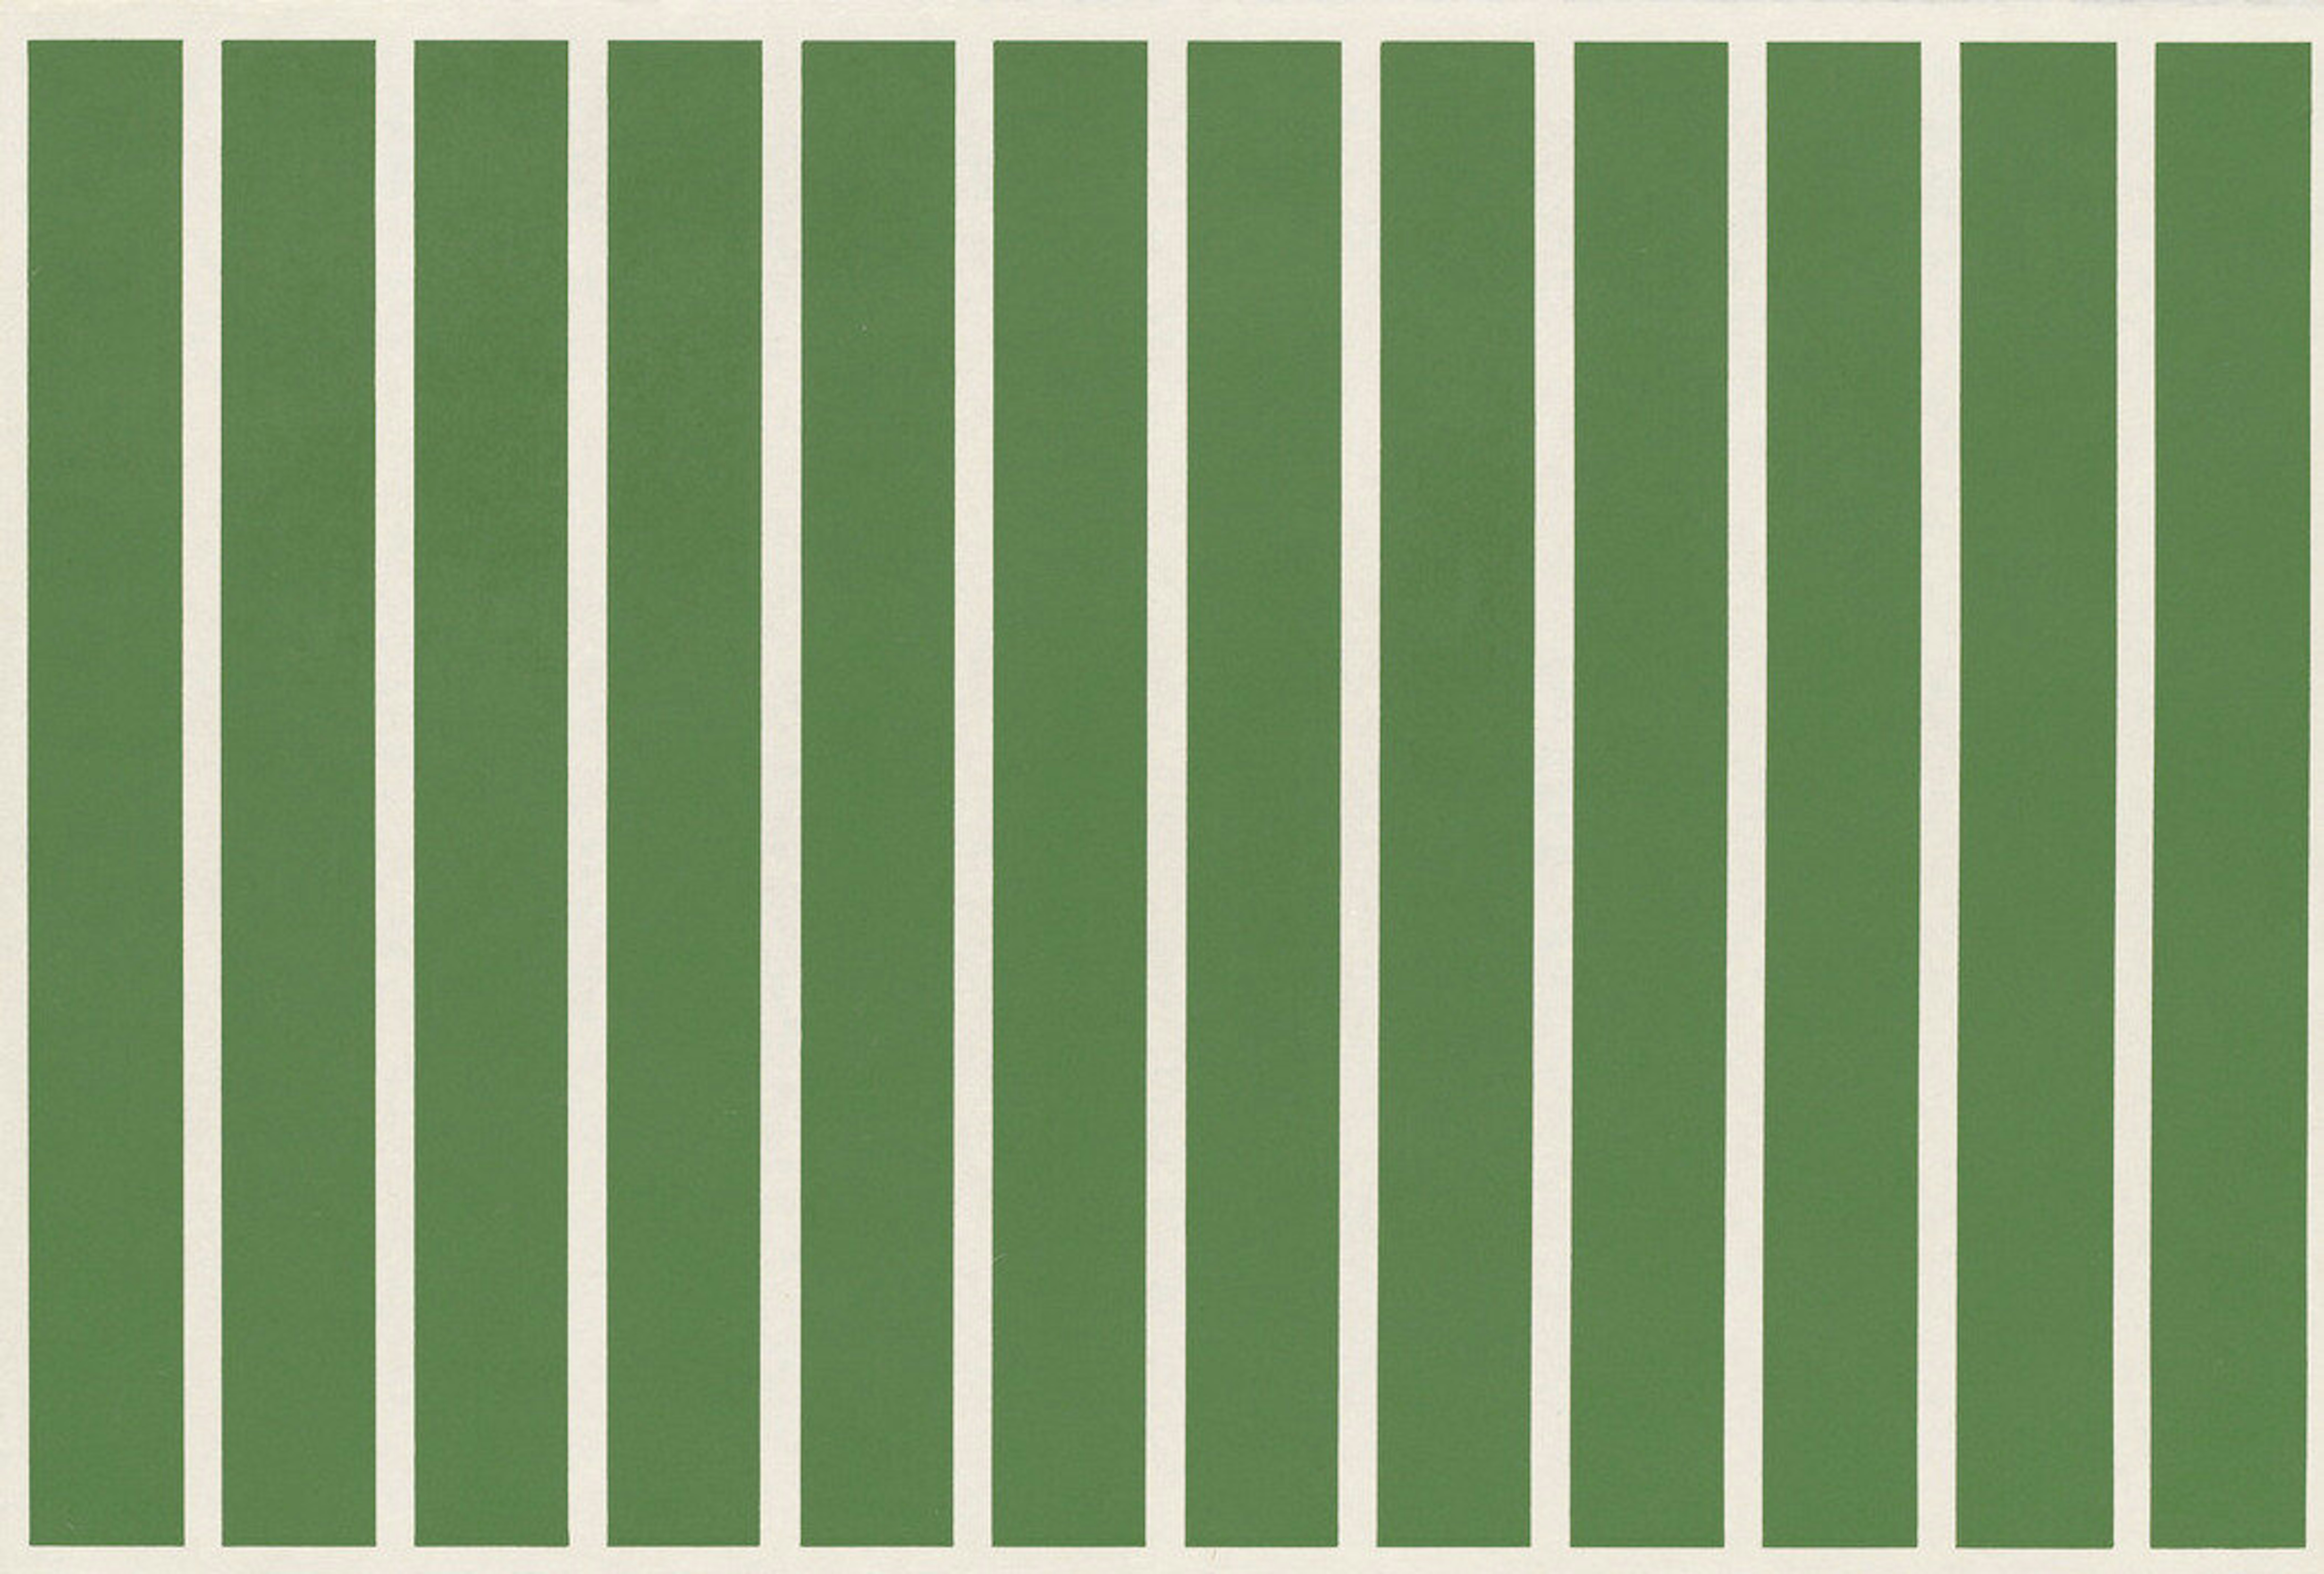 Woodcut by Donald Judd depicting green rectangle with off white vertical lines inside it